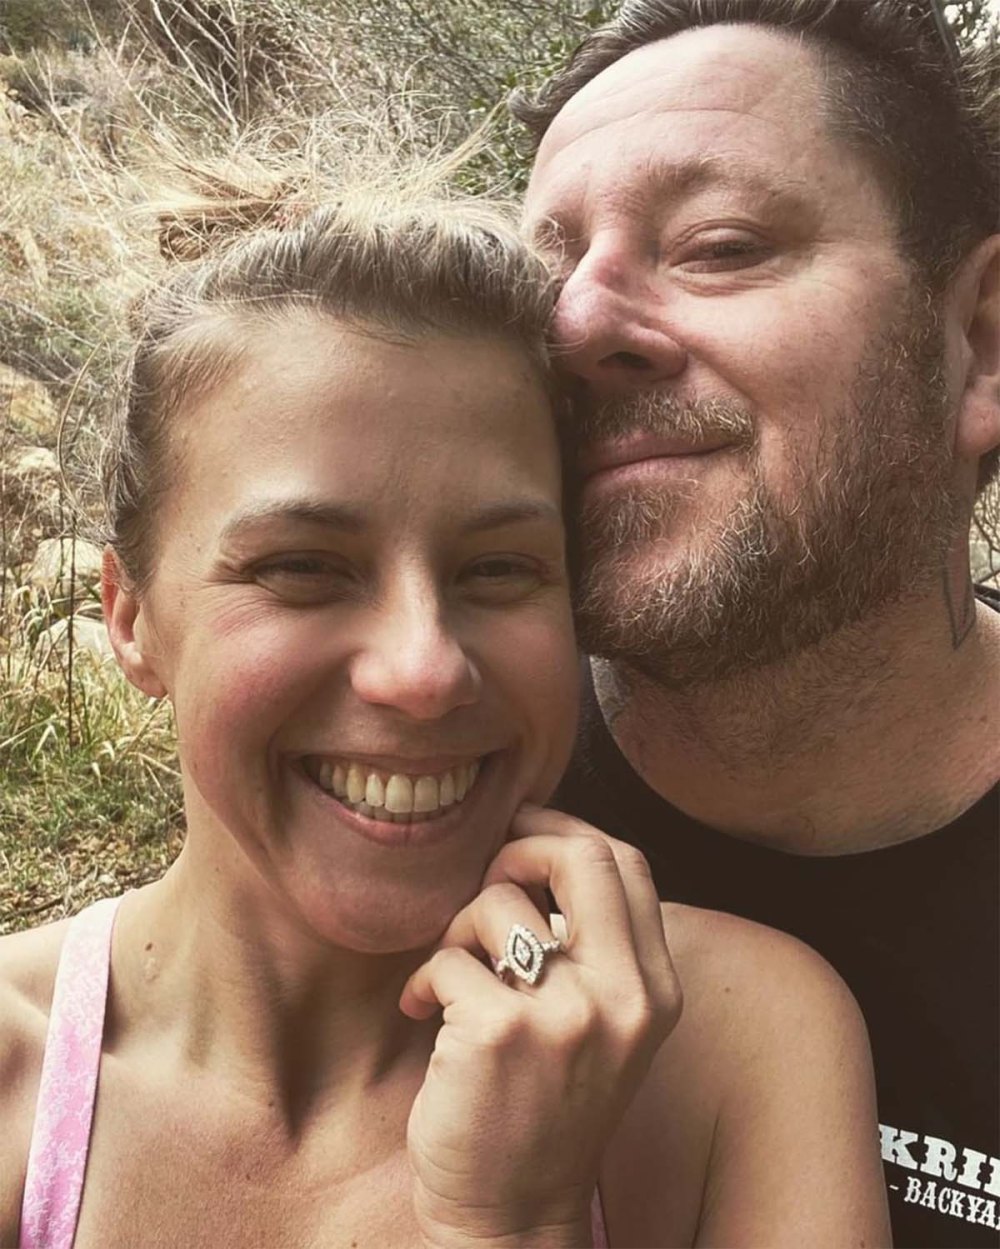 Jodie Sweetin Is Engaged Mescal Wasilewski After 4 Years Together